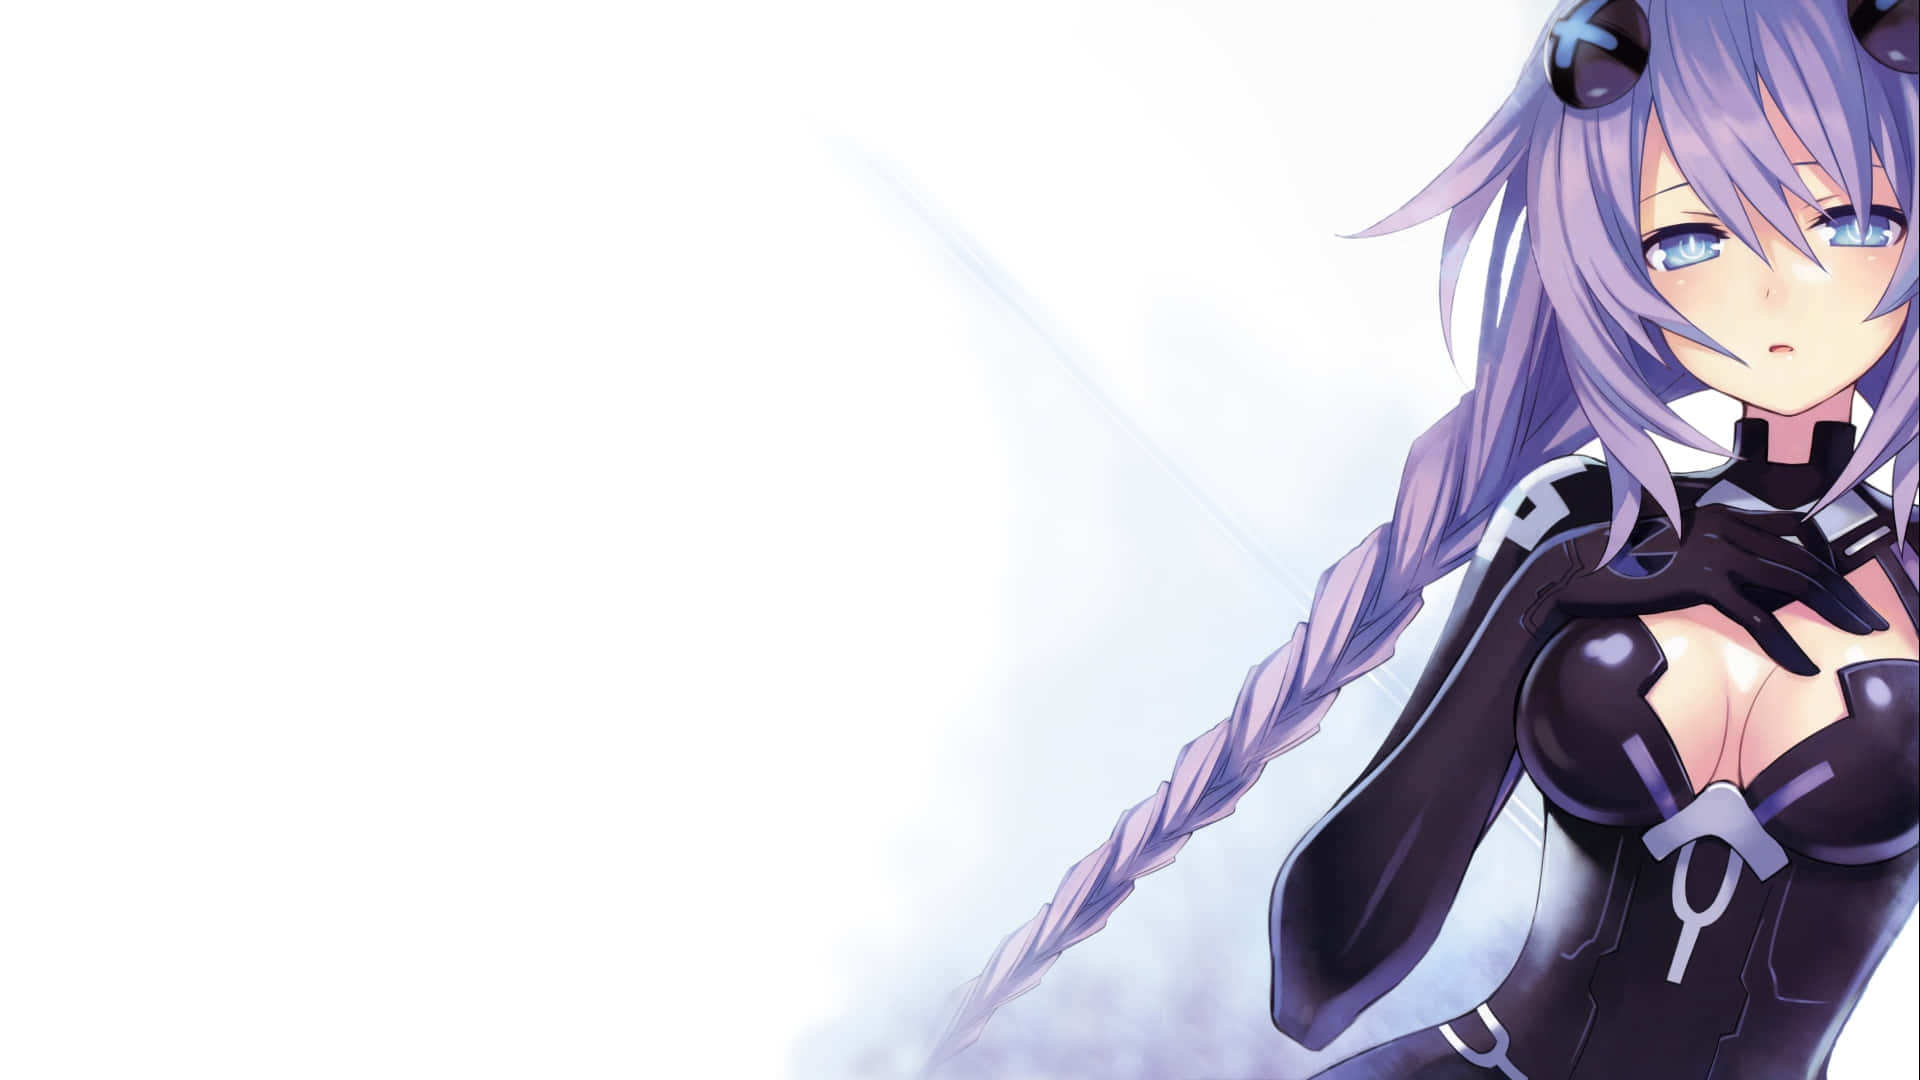 Join the cast of Hyperdimension Neptunia on their quest for justice! Wallpaper